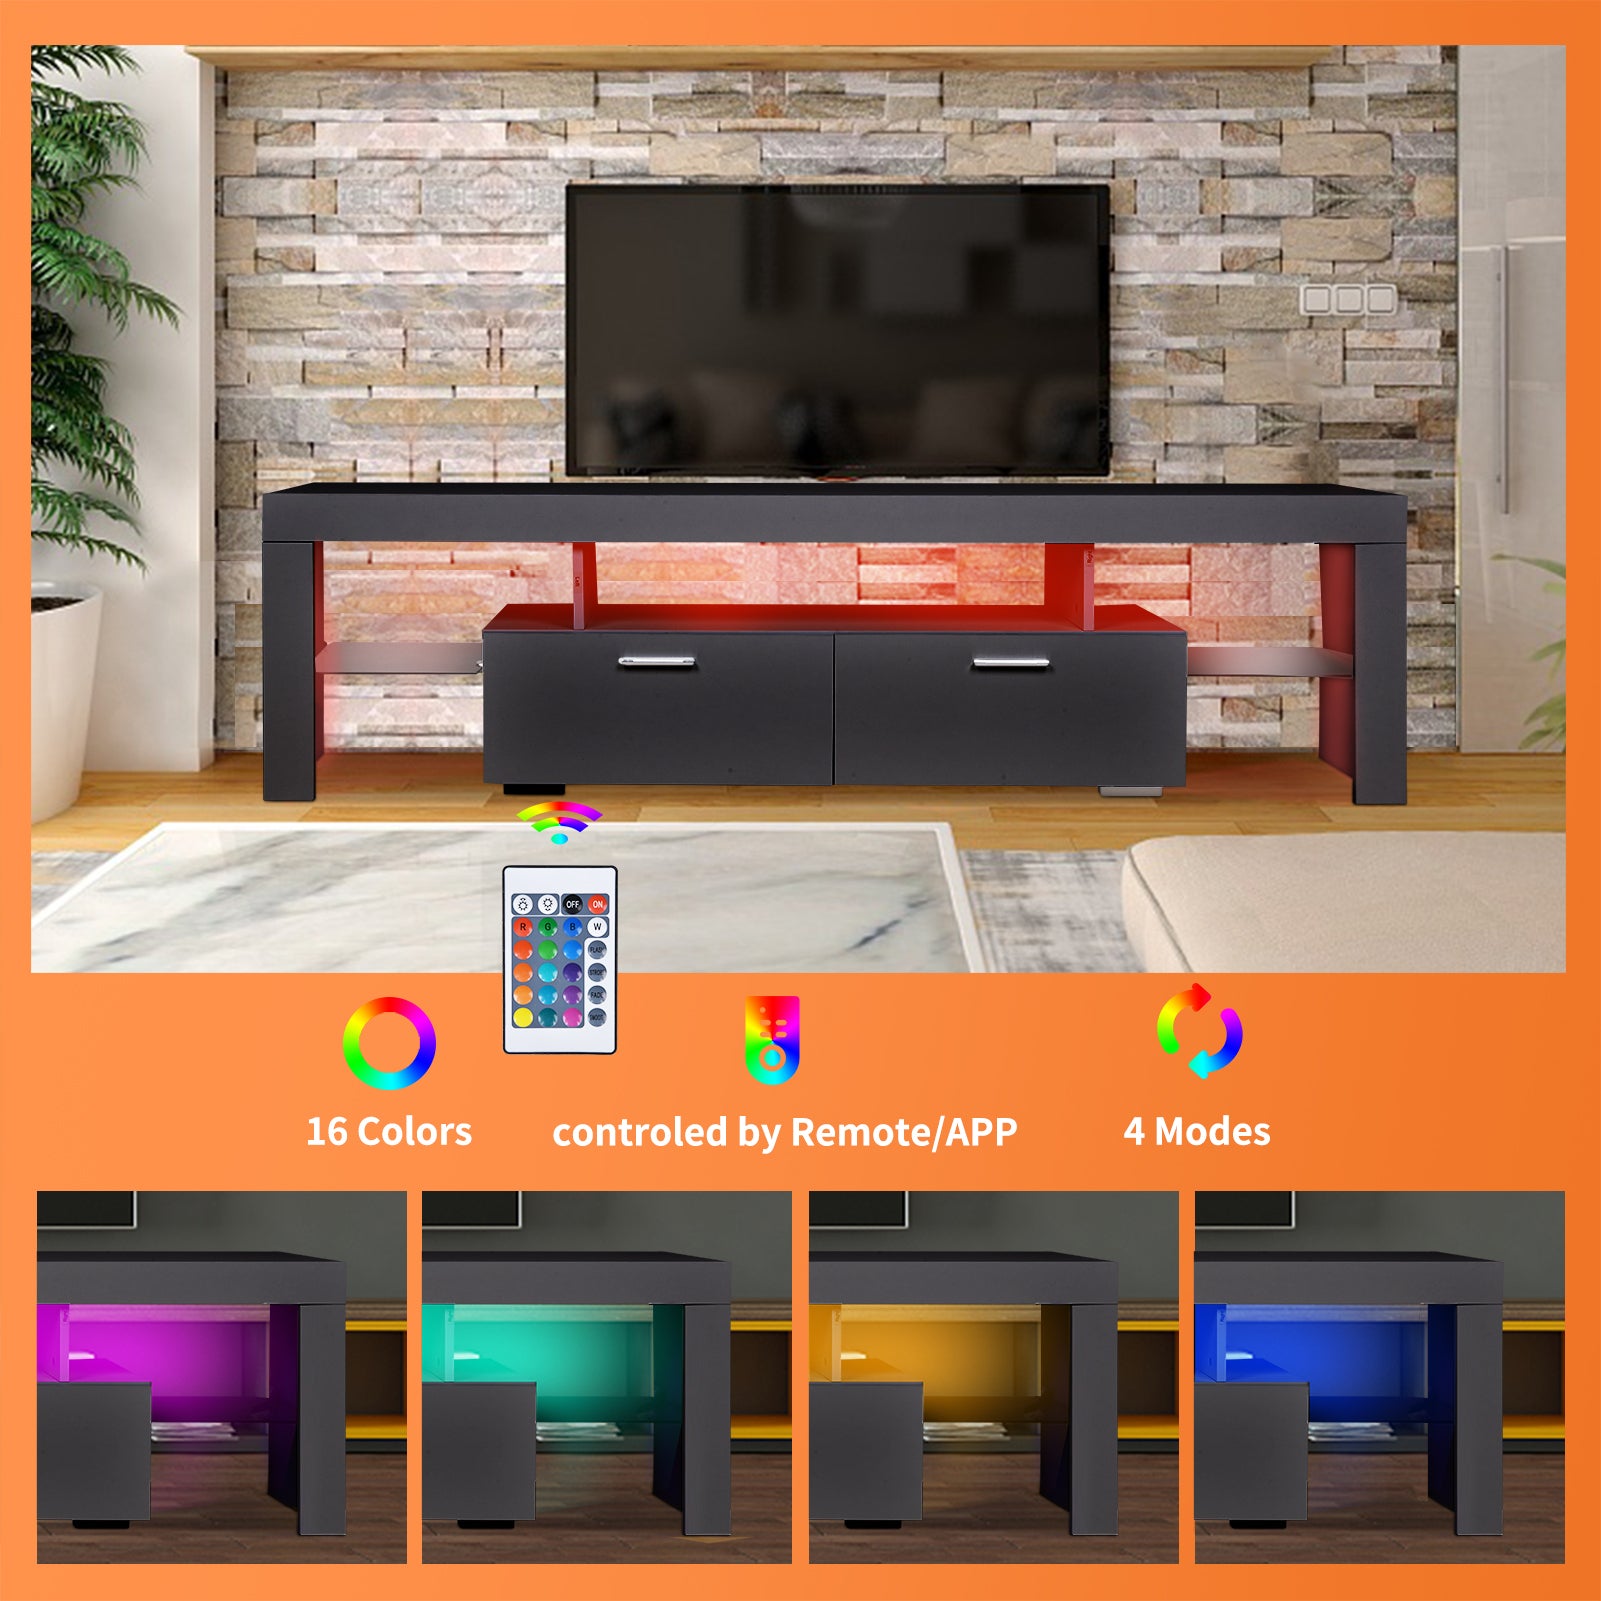 LED TV stand modern TV stand with storage Entertainment Center with drawer TV cabinet for Up to 75 inch for Gaming Living Room Bedroom - Enova Luxe Home Store